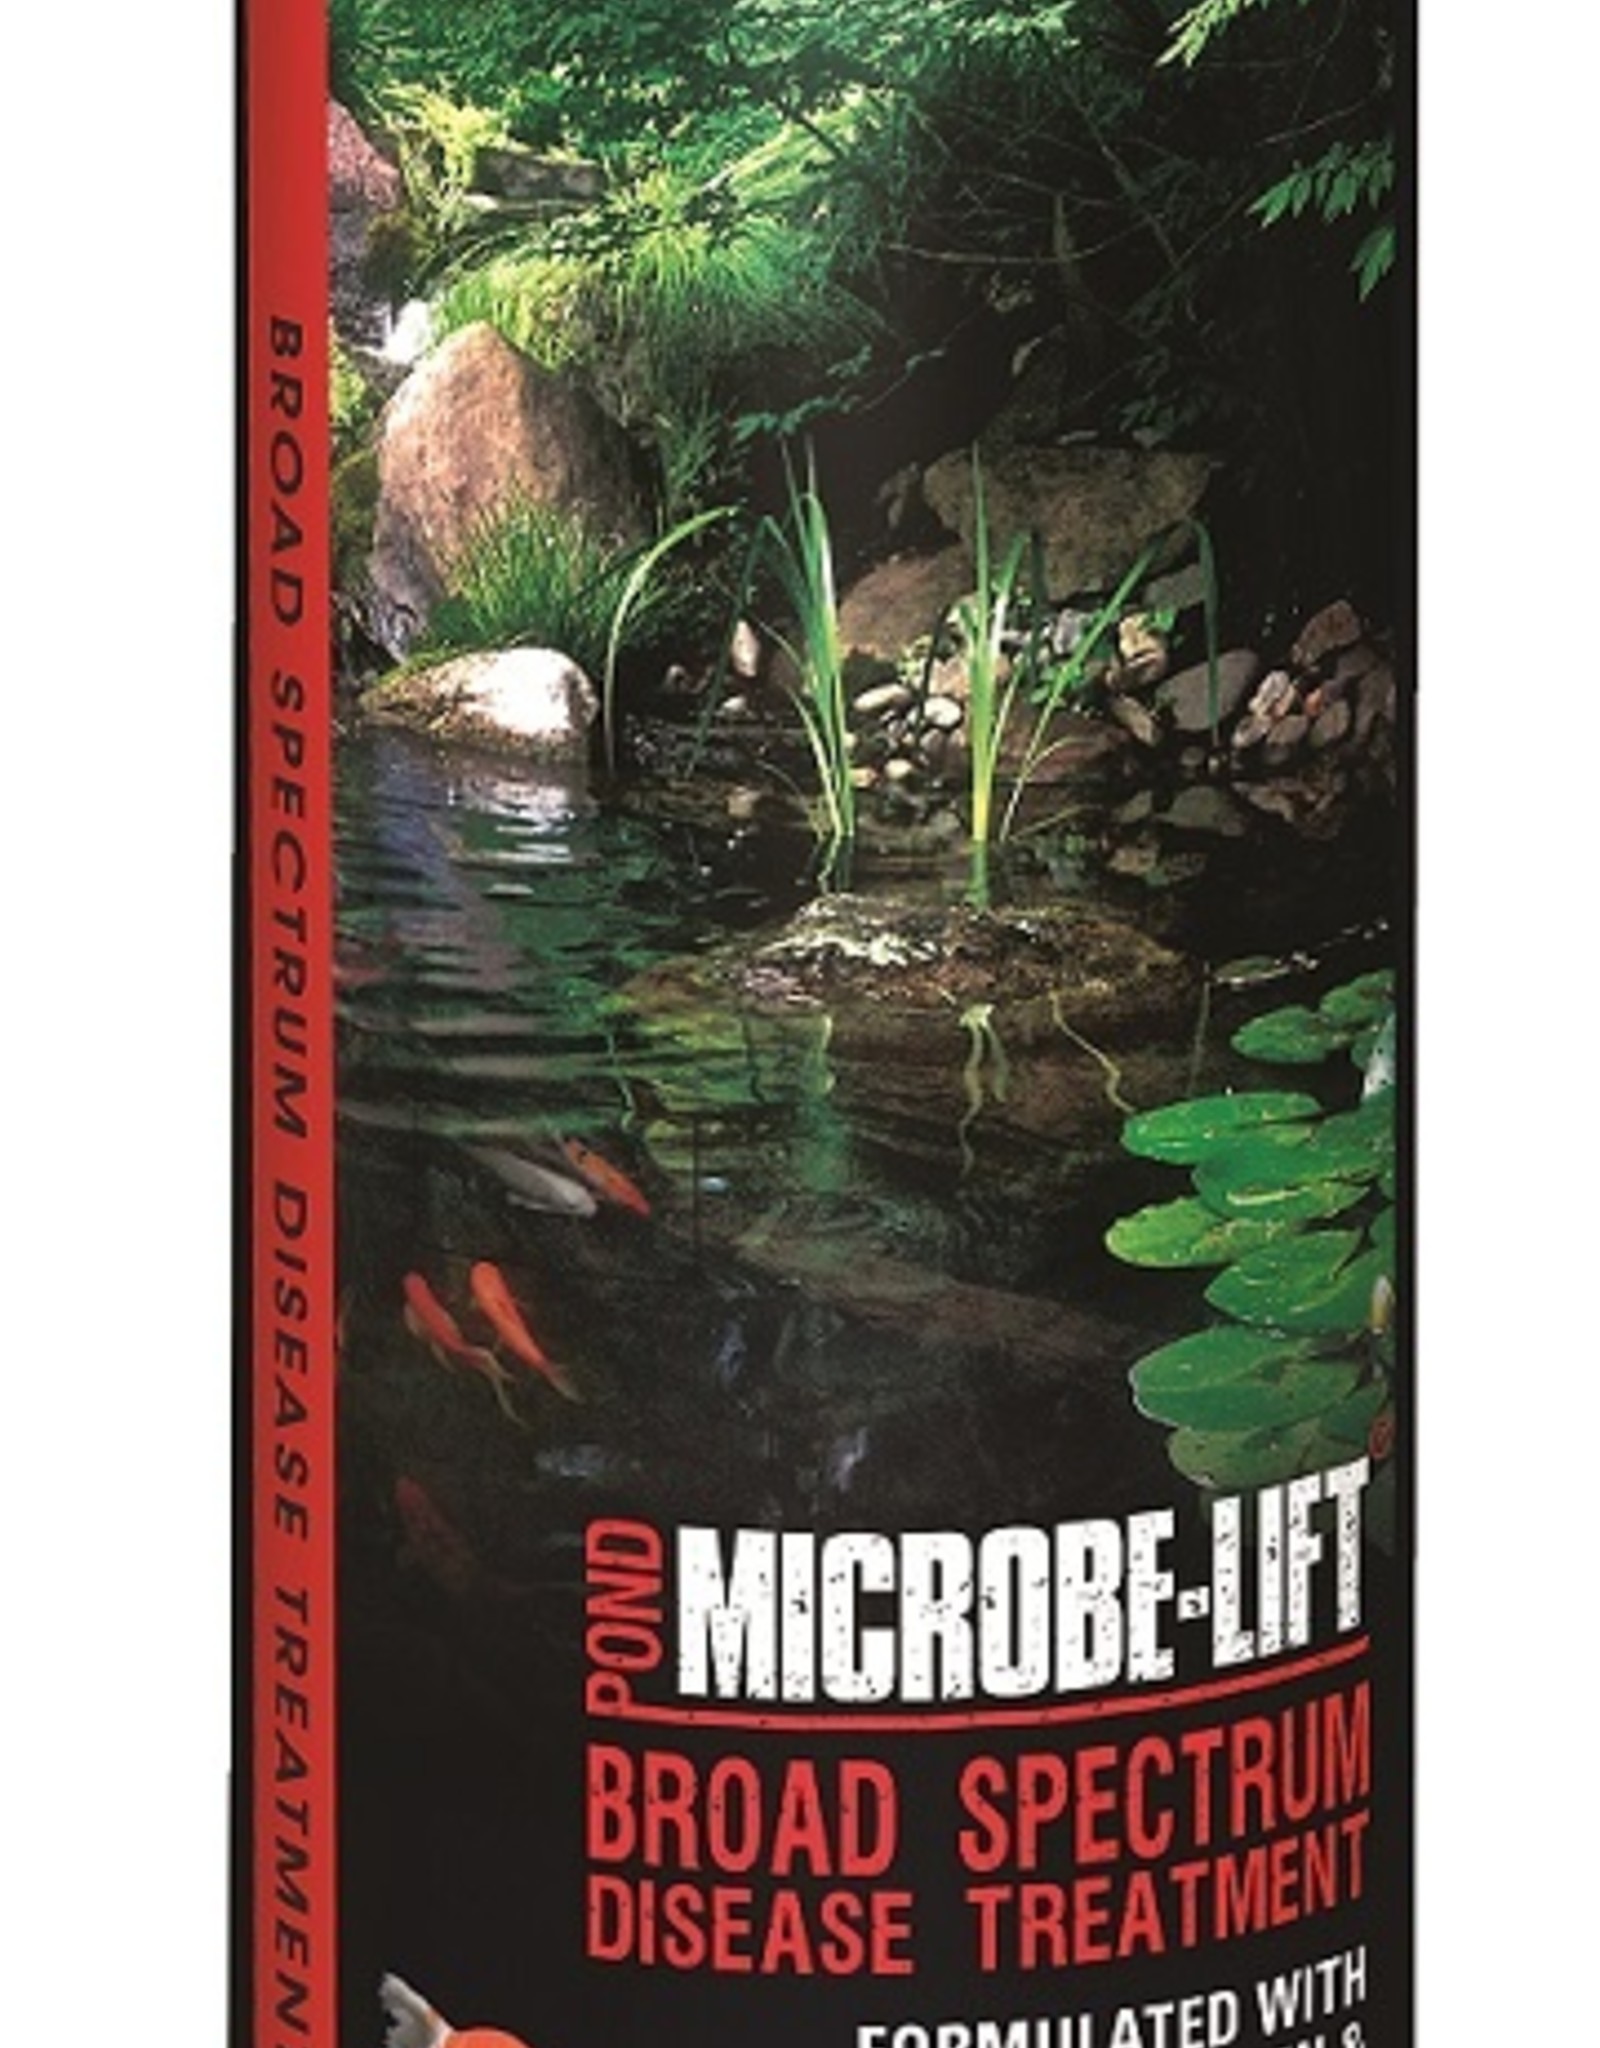 ECOLOGICAL LABS MICROBE LIFT 32 OZ BROAD SPECTRUM DISEASE CONTROL